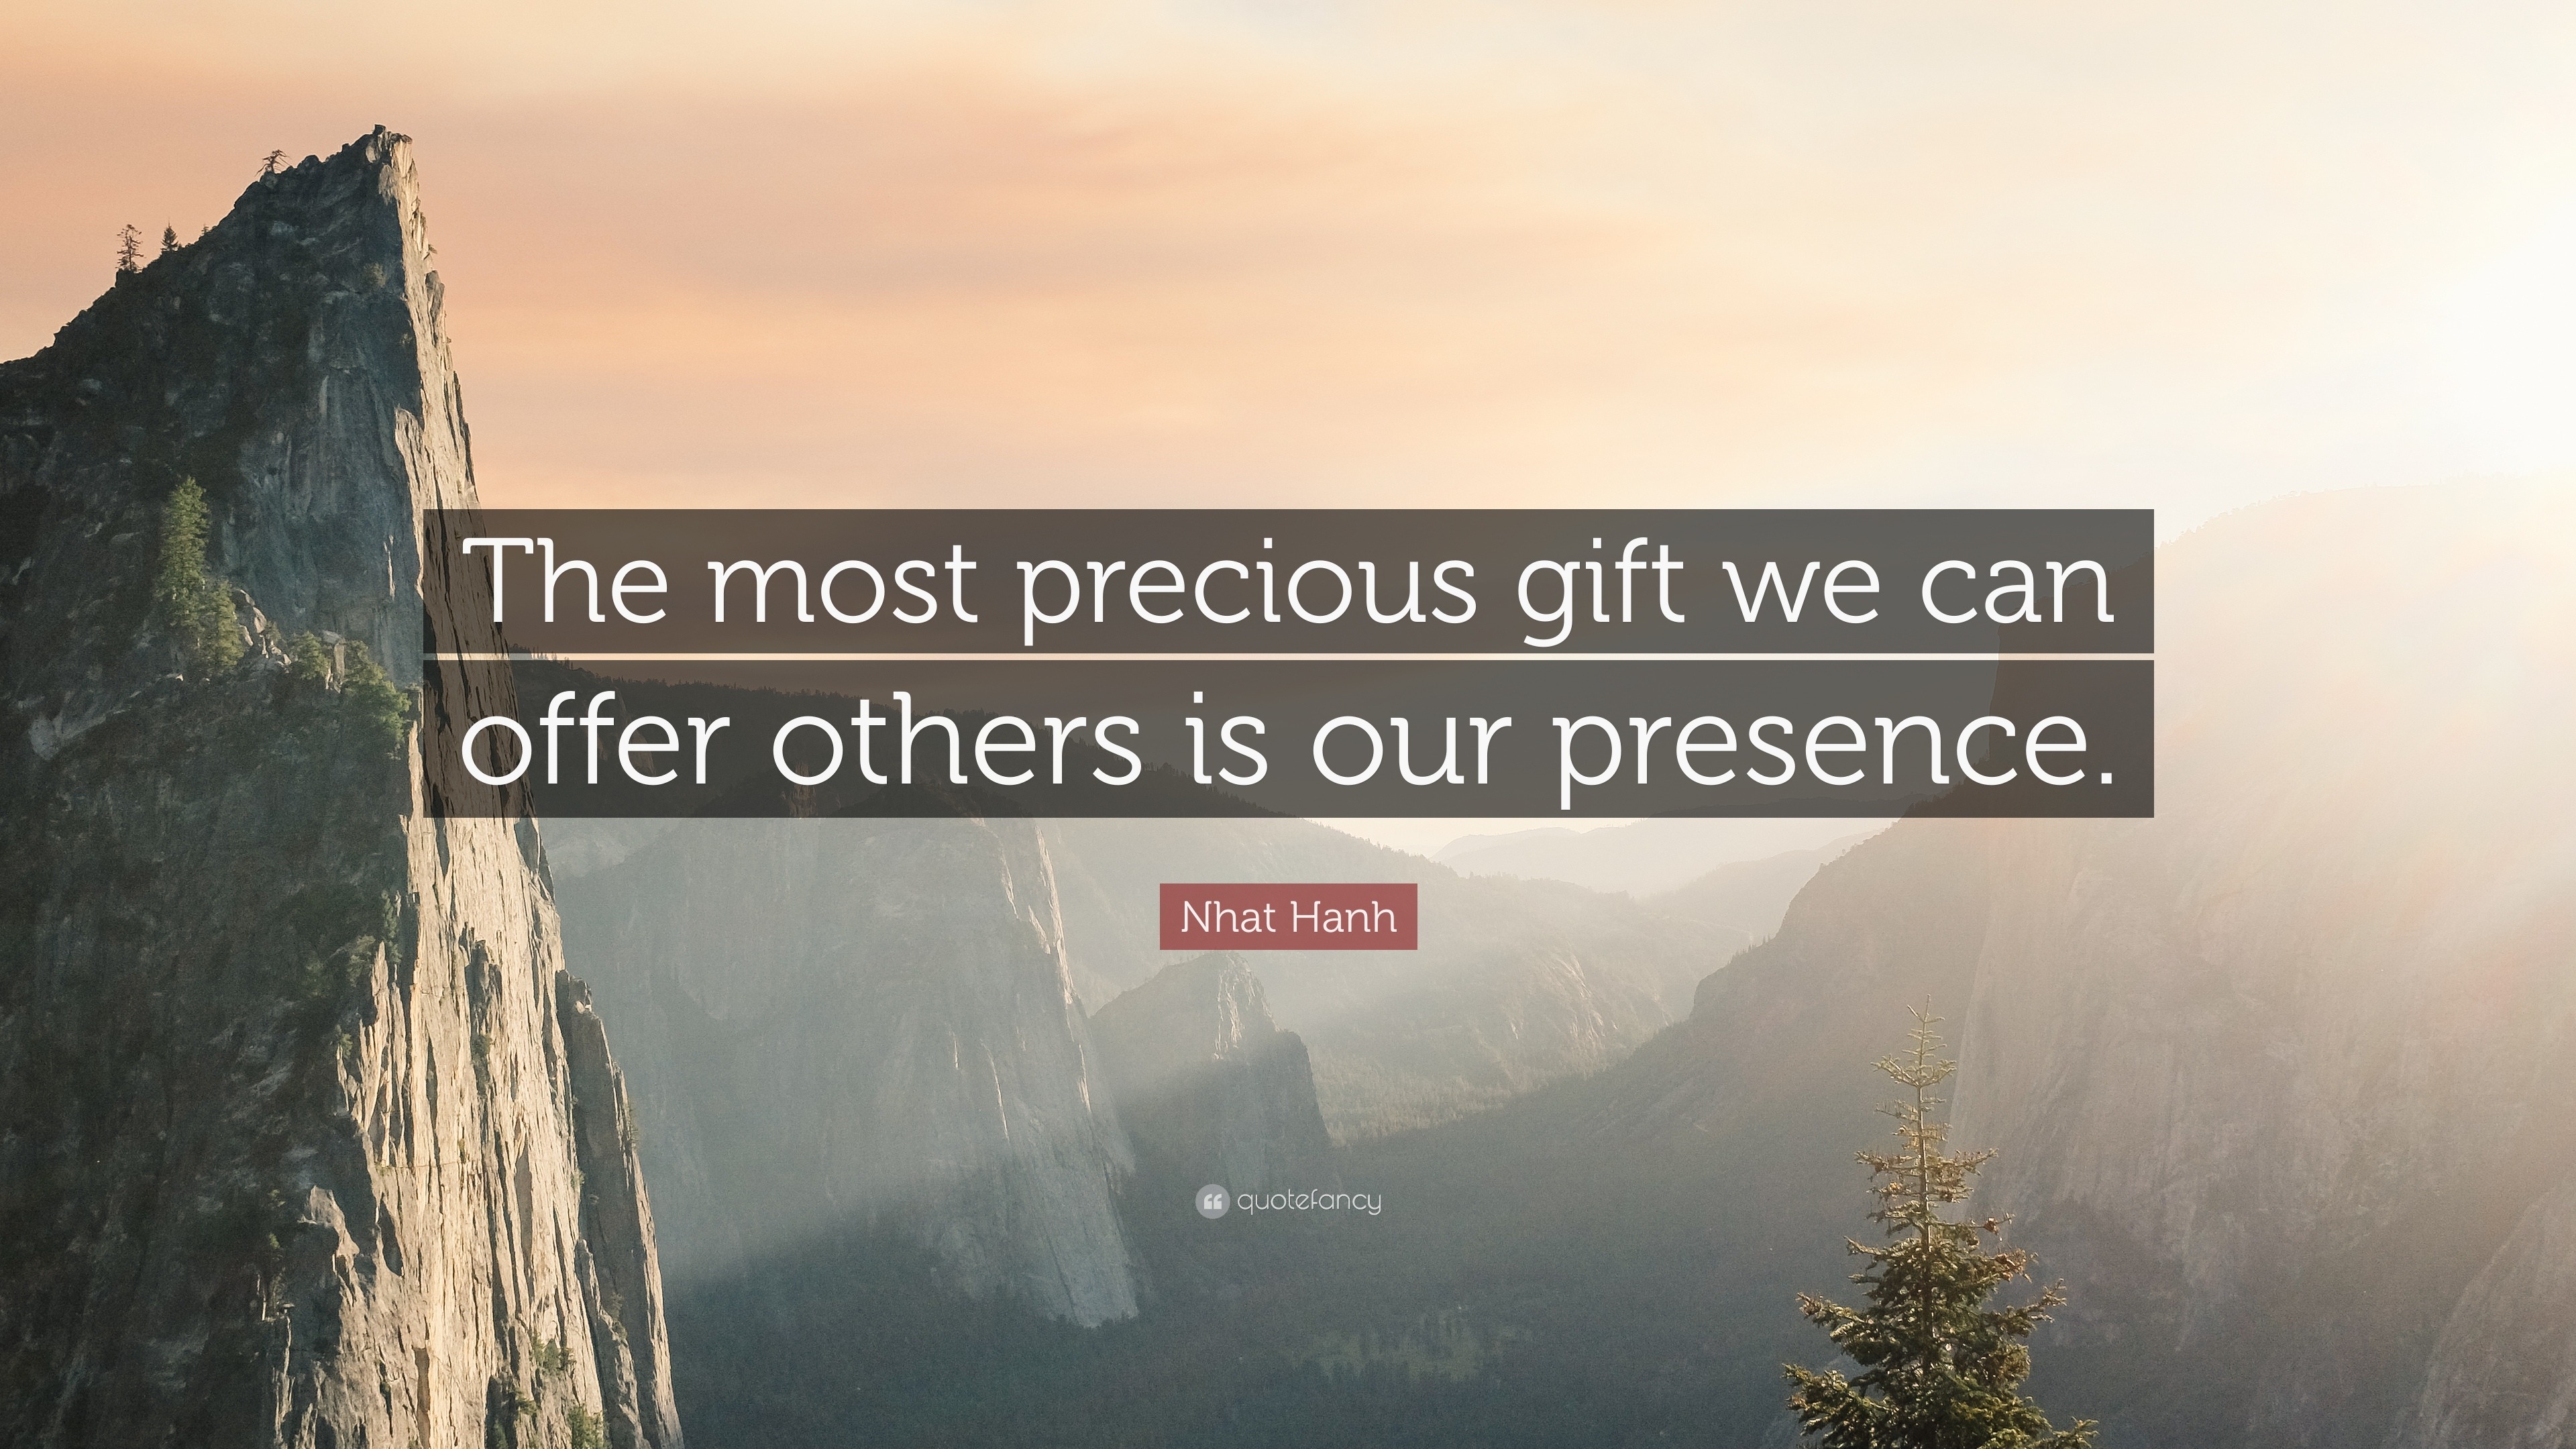 Nhat Hanh Quote “The most precious gift we can offer others is our